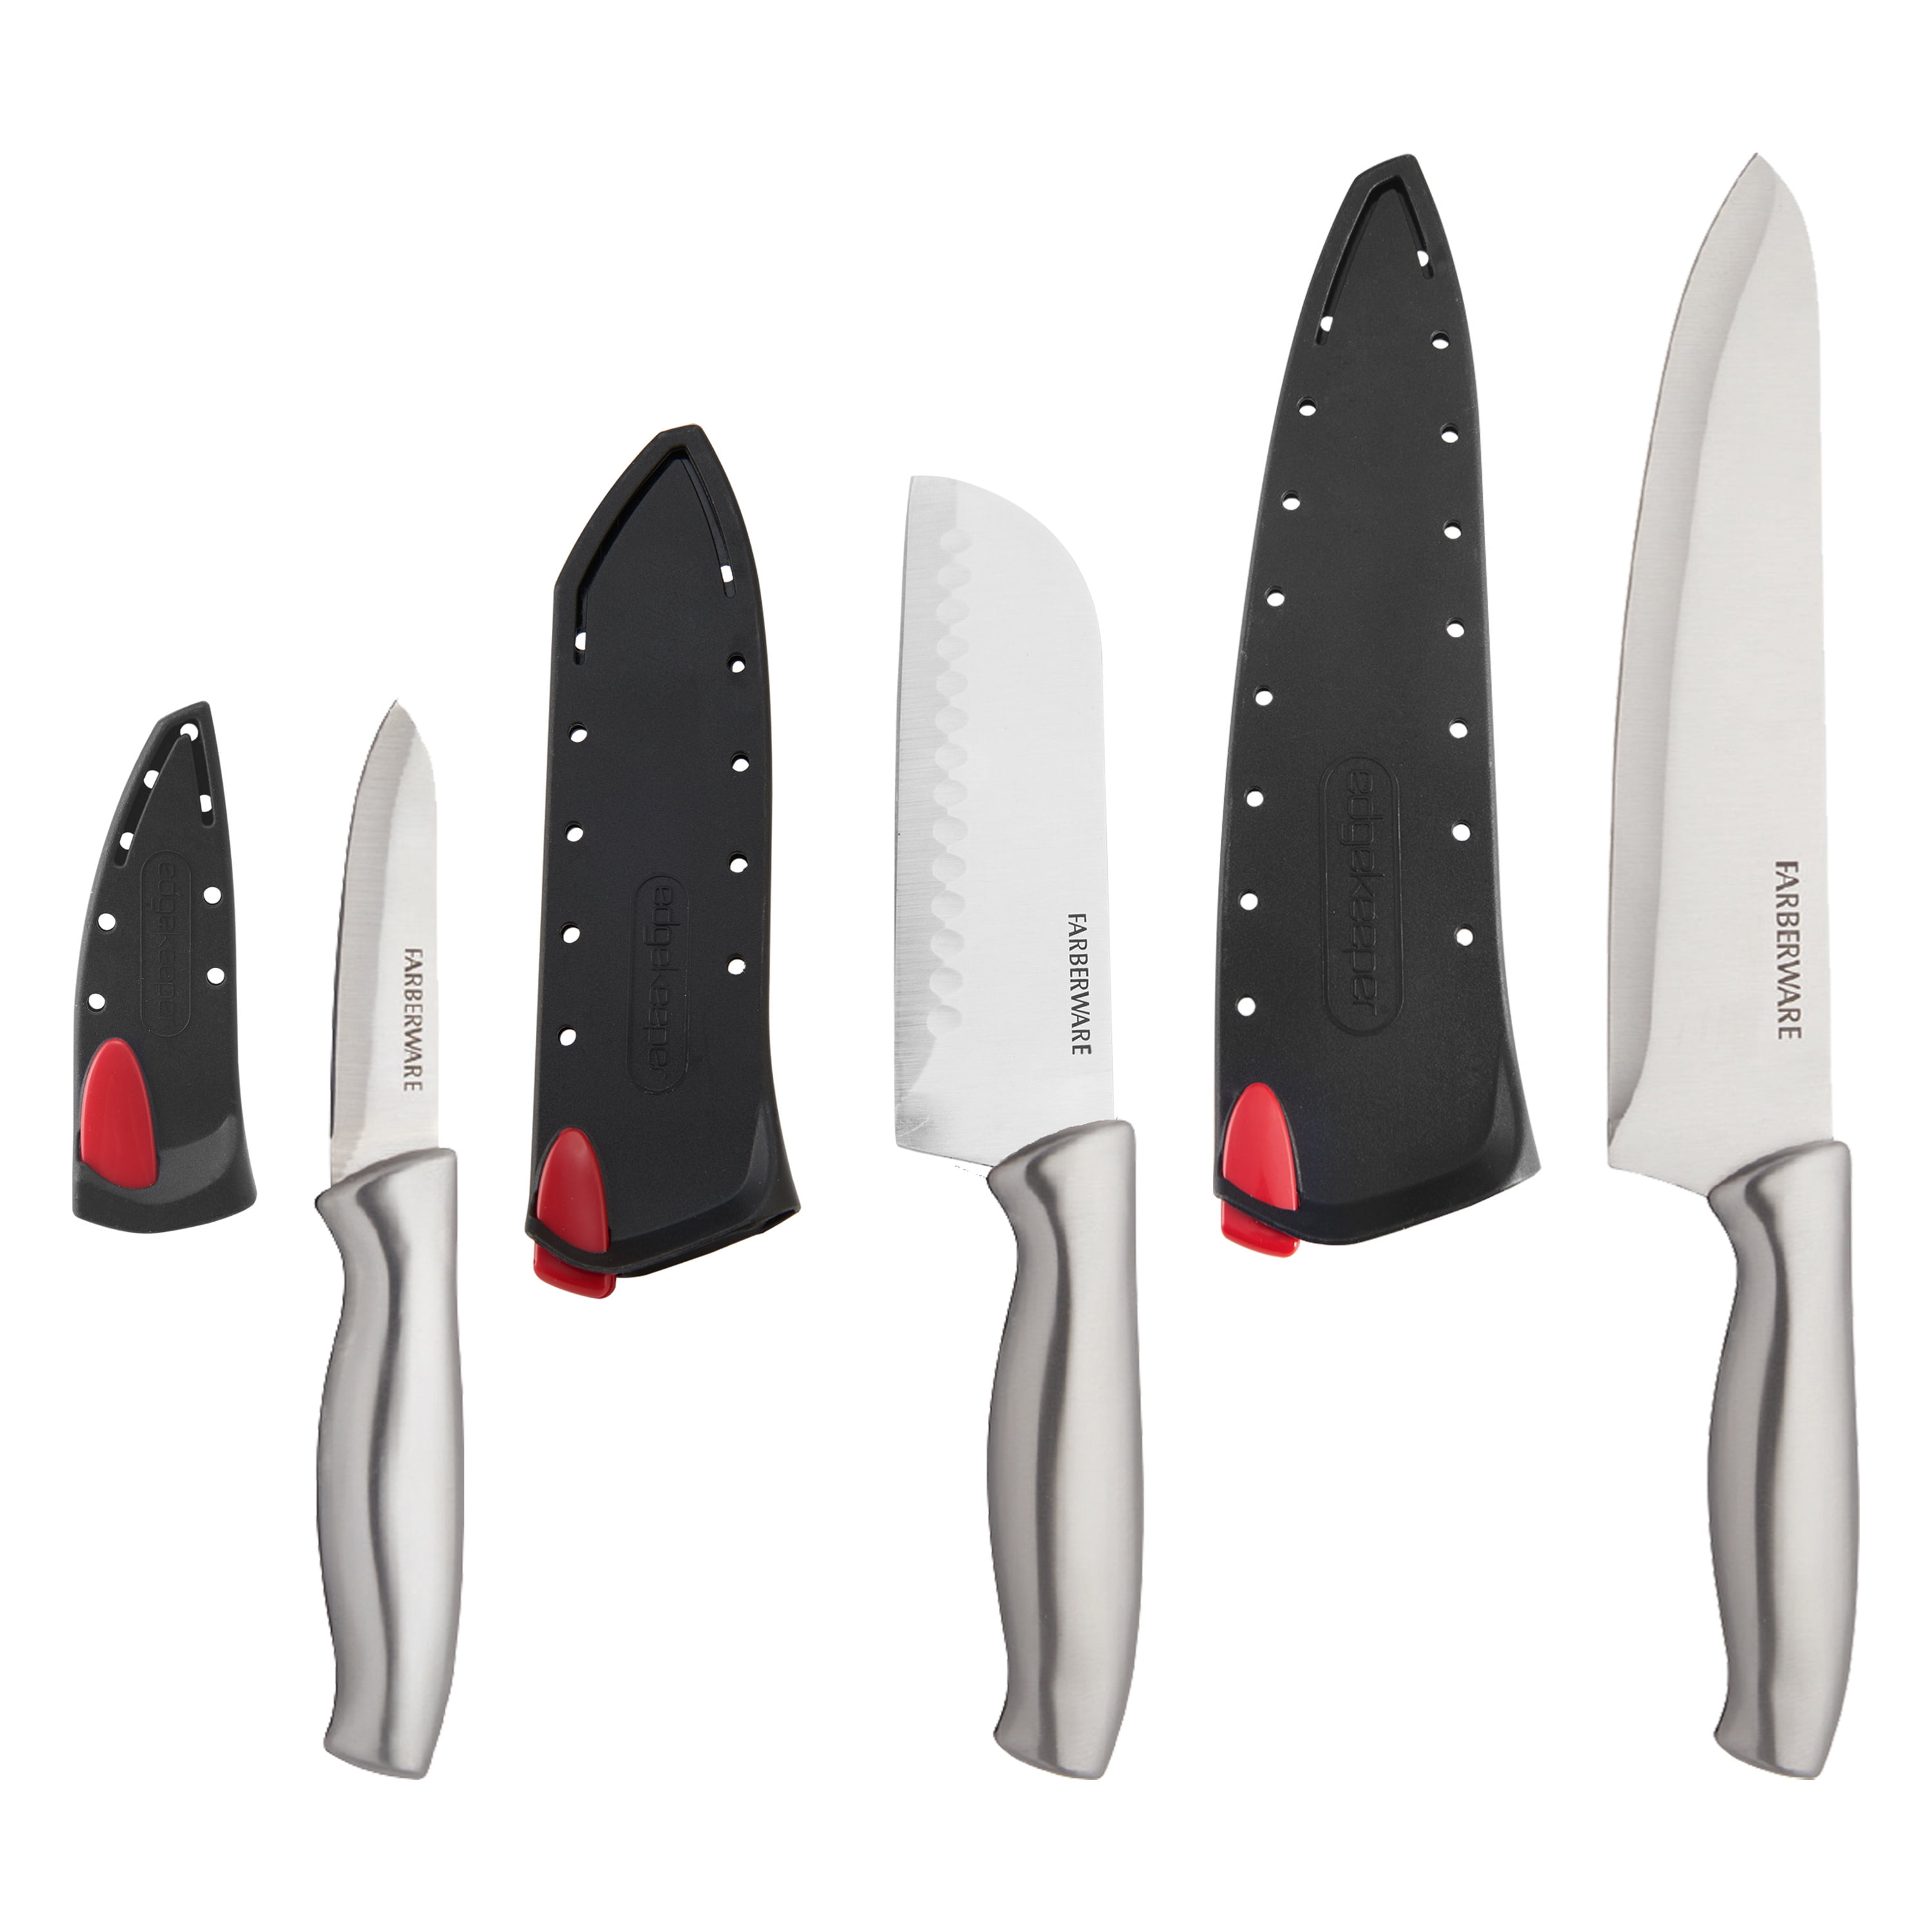 Knife Blade Guards, 6 Inch and 8 Inch Knife Sheath Set